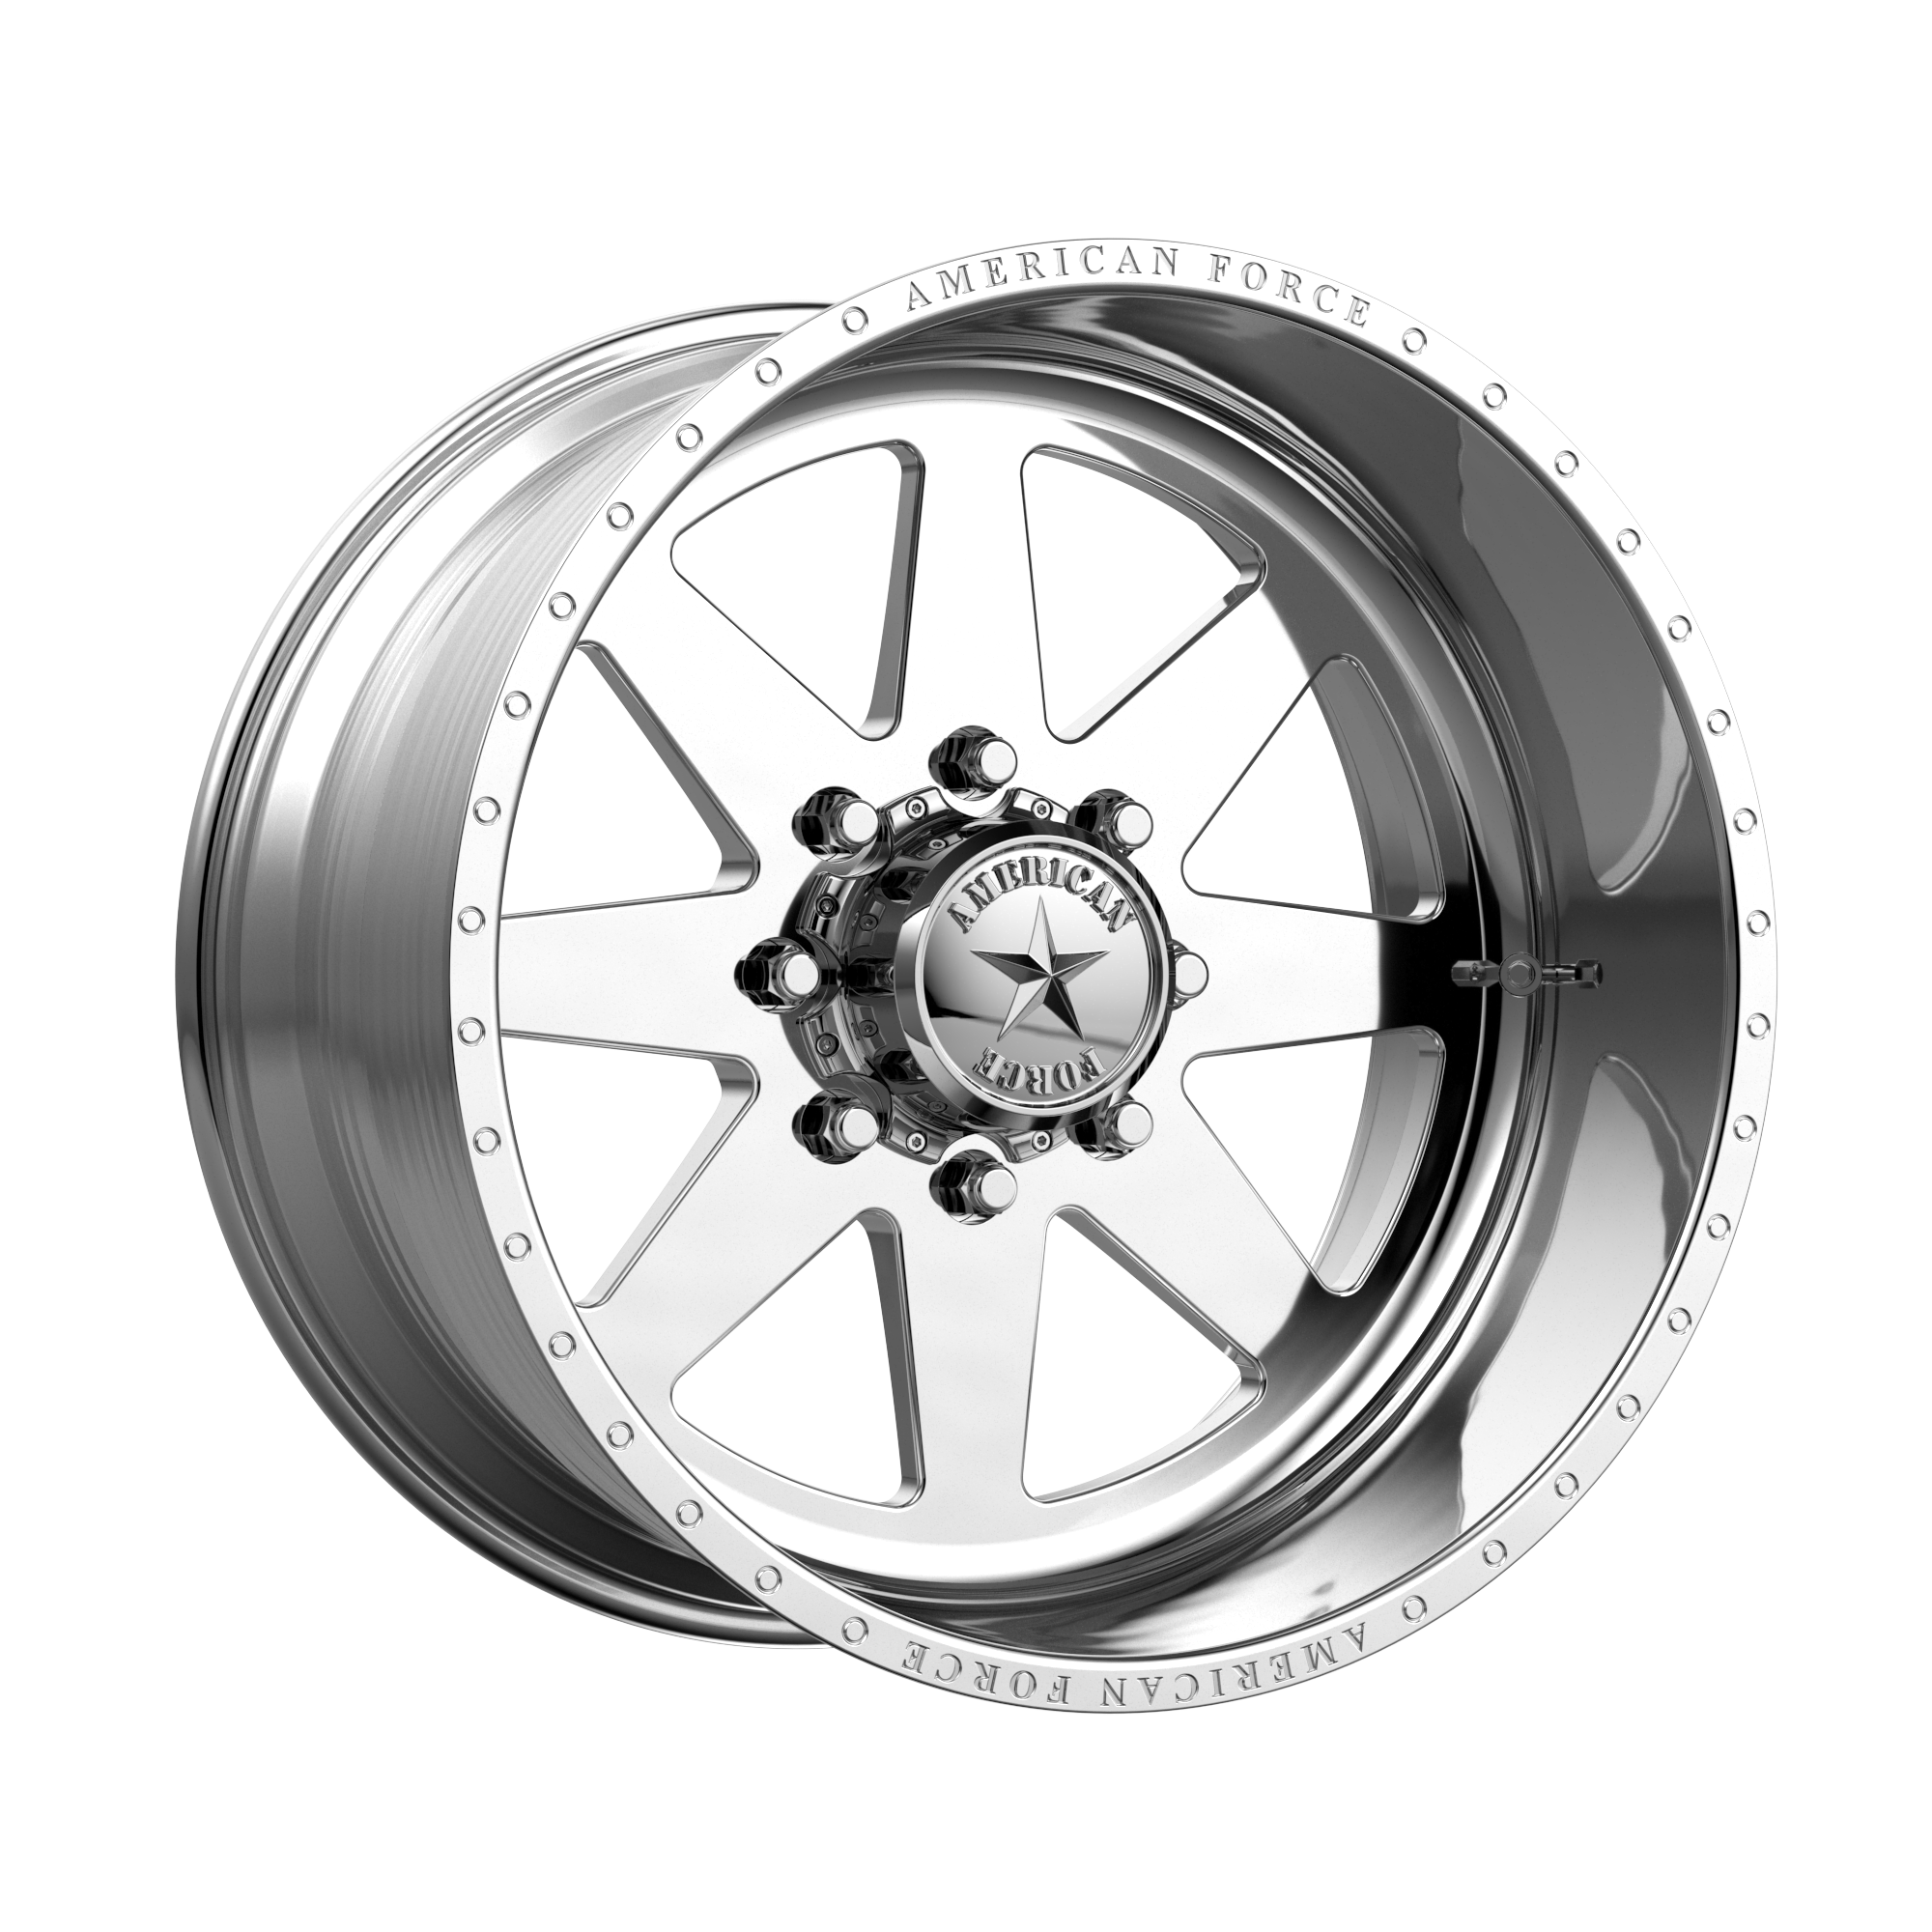 INDEPENDENCE SS 20x10 6x135.00 POLISHED (-25 mm) - Tires and Engine Performance